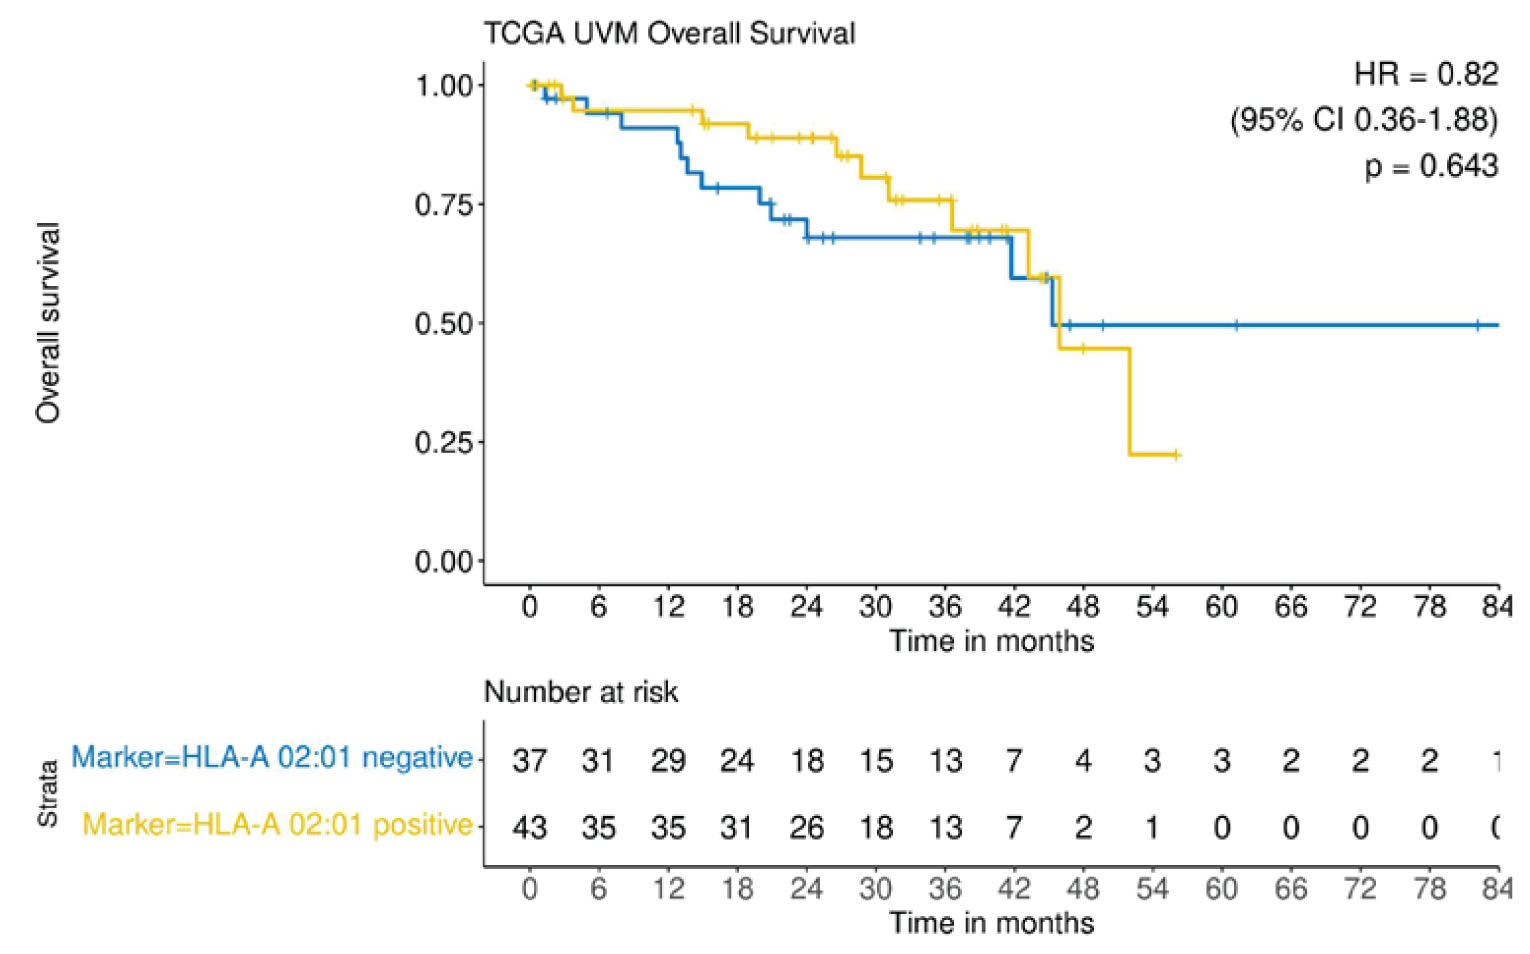 Kaplan-Meier graph of overall survival curves for HLA-A*02:01-positive and HLA-A*02:01-negative patients with mUM. The curves diverge at approximately 6 months, with the HLA-A*02:01-positive group above the HLA-A*02:01-negative group. The curves cross at approximately Week 45 and then diverge, with the HLA-A*02:01-negative group above the HLA-A*02:01-positive group.